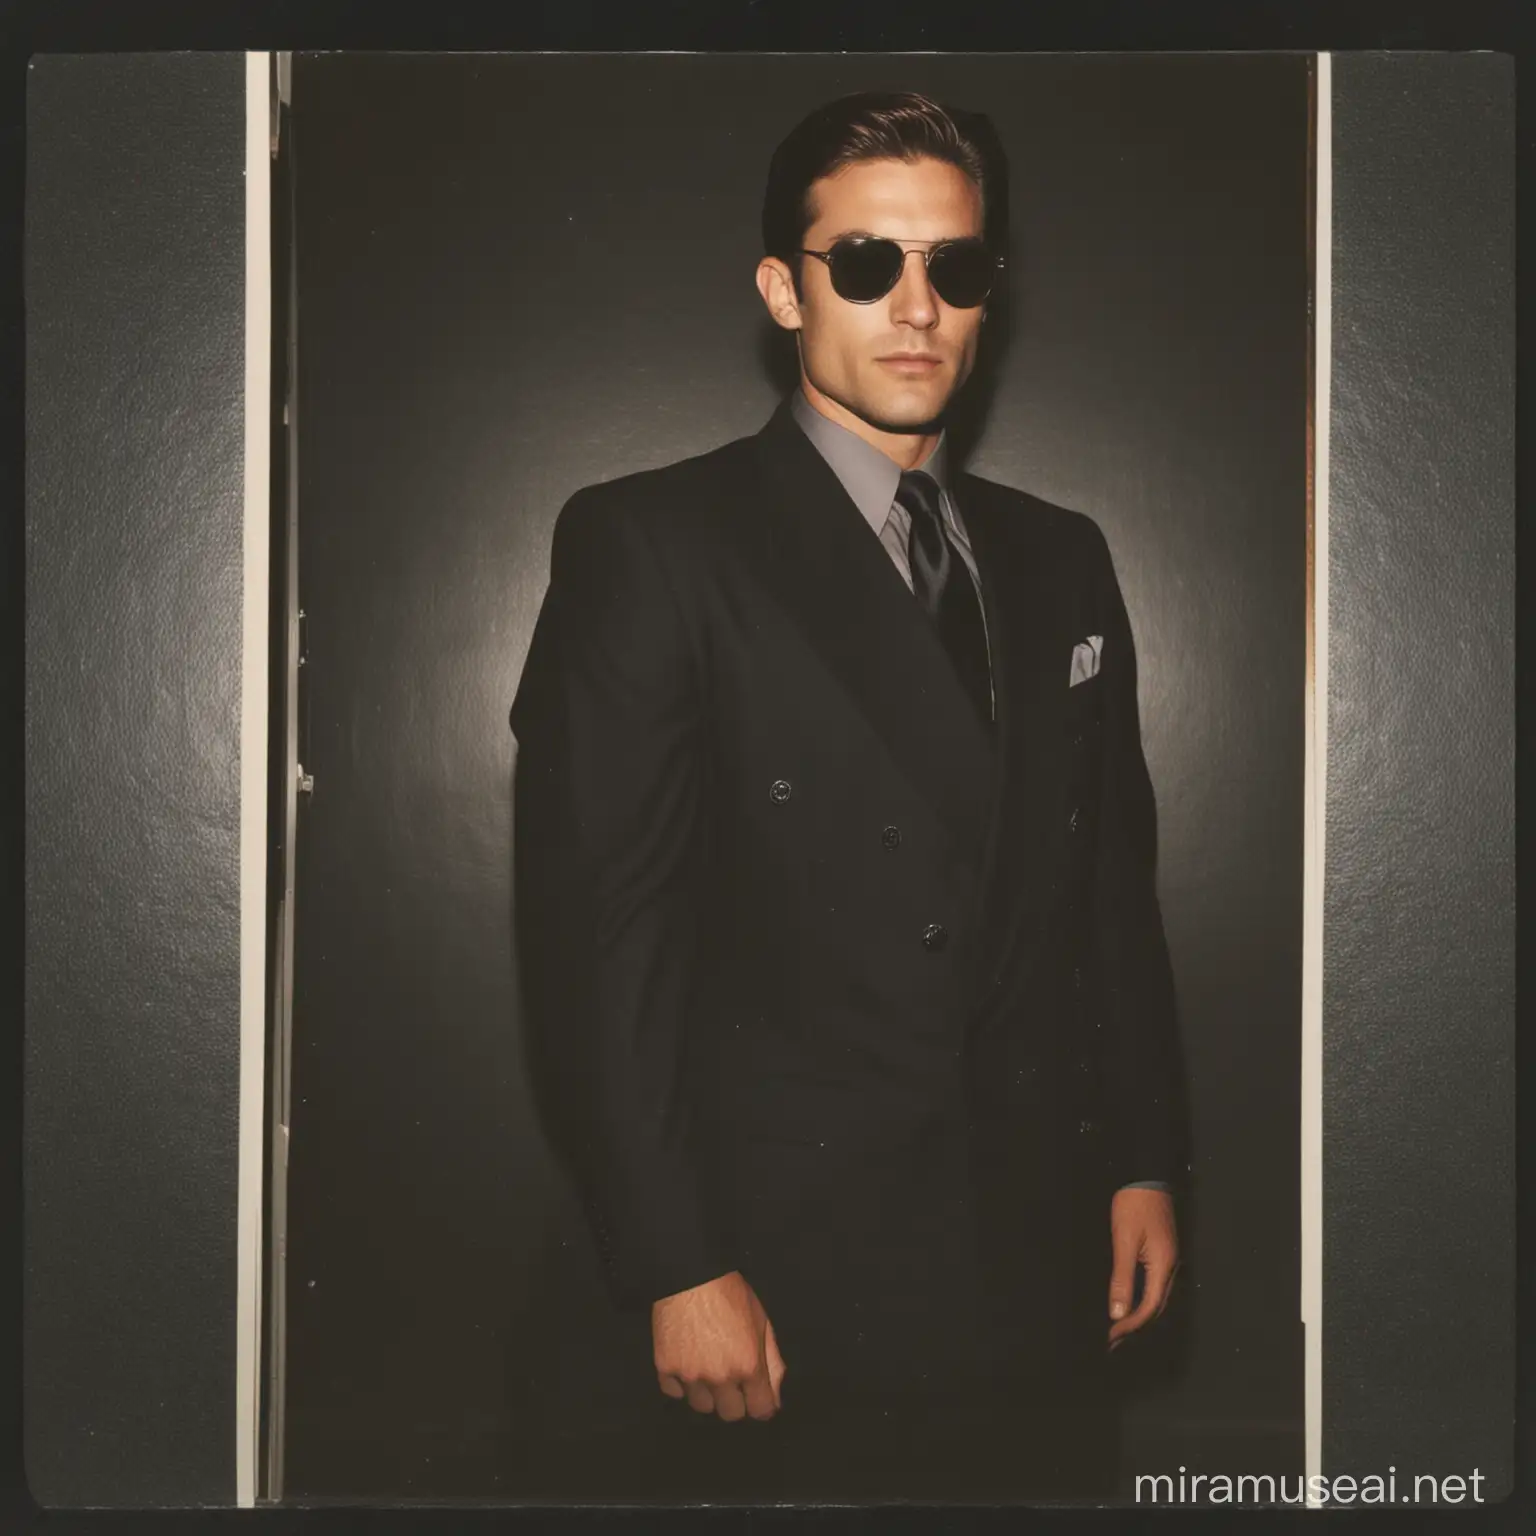 A secret agent with brown greased side parting hair, a black suit, black sunglasses, standing in a dark room. polaroid picture, 1994